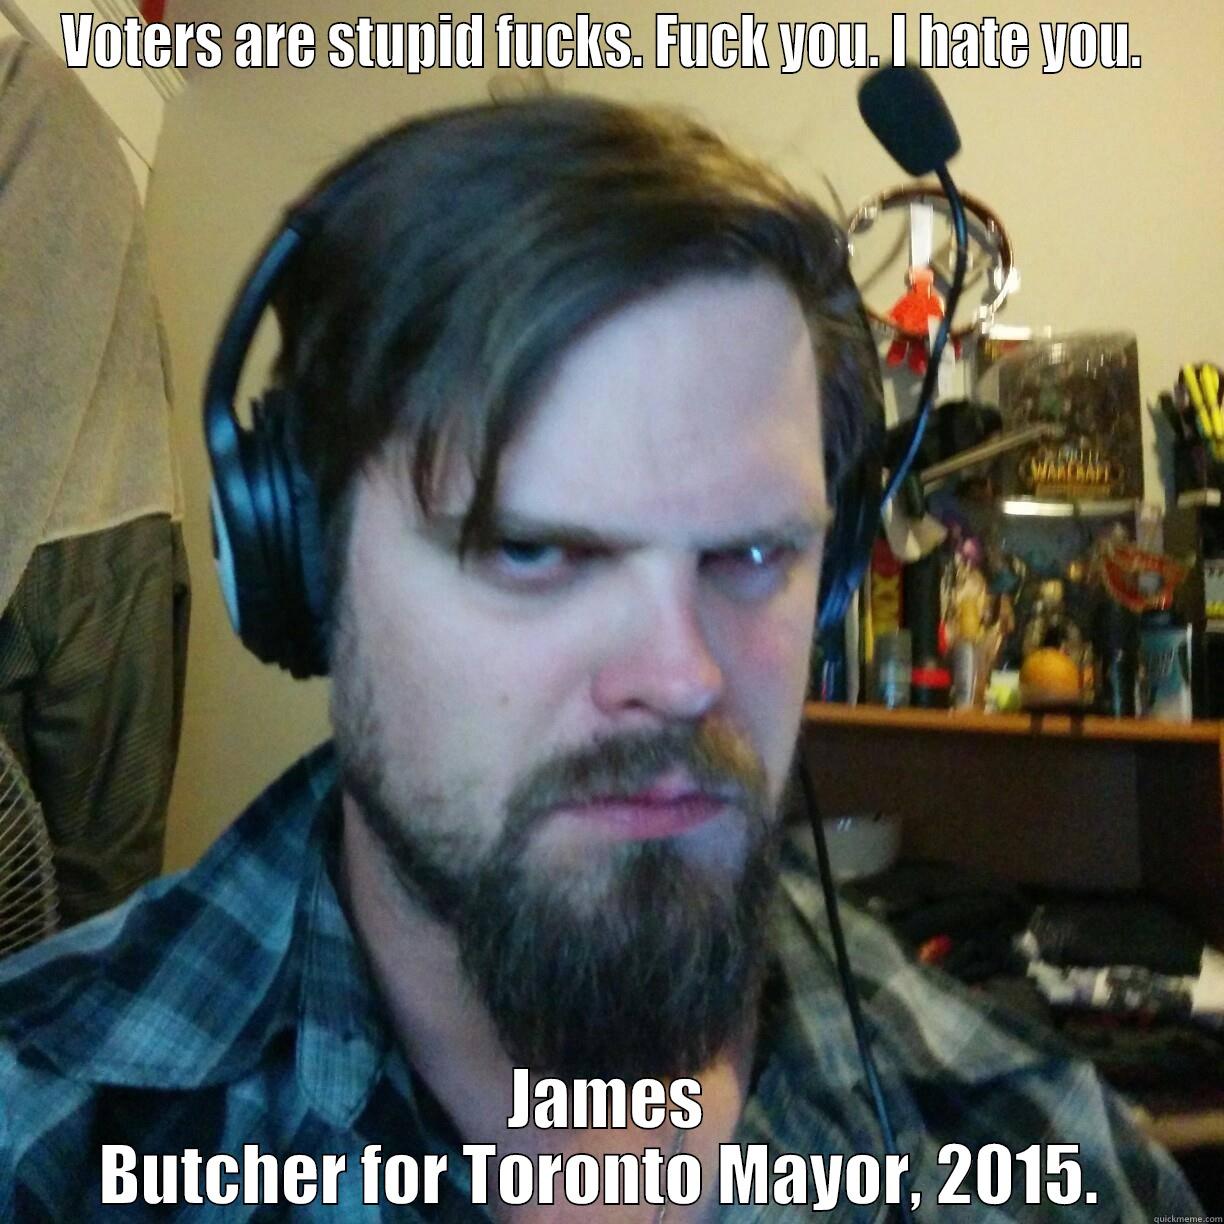 Campaign ad.  - VOTERS ARE STUPID FUCKS. FUCK YOU. I HATE YOU.  JAMES BUTCHER FOR TORONTO MAYOR, 2015.  Misc